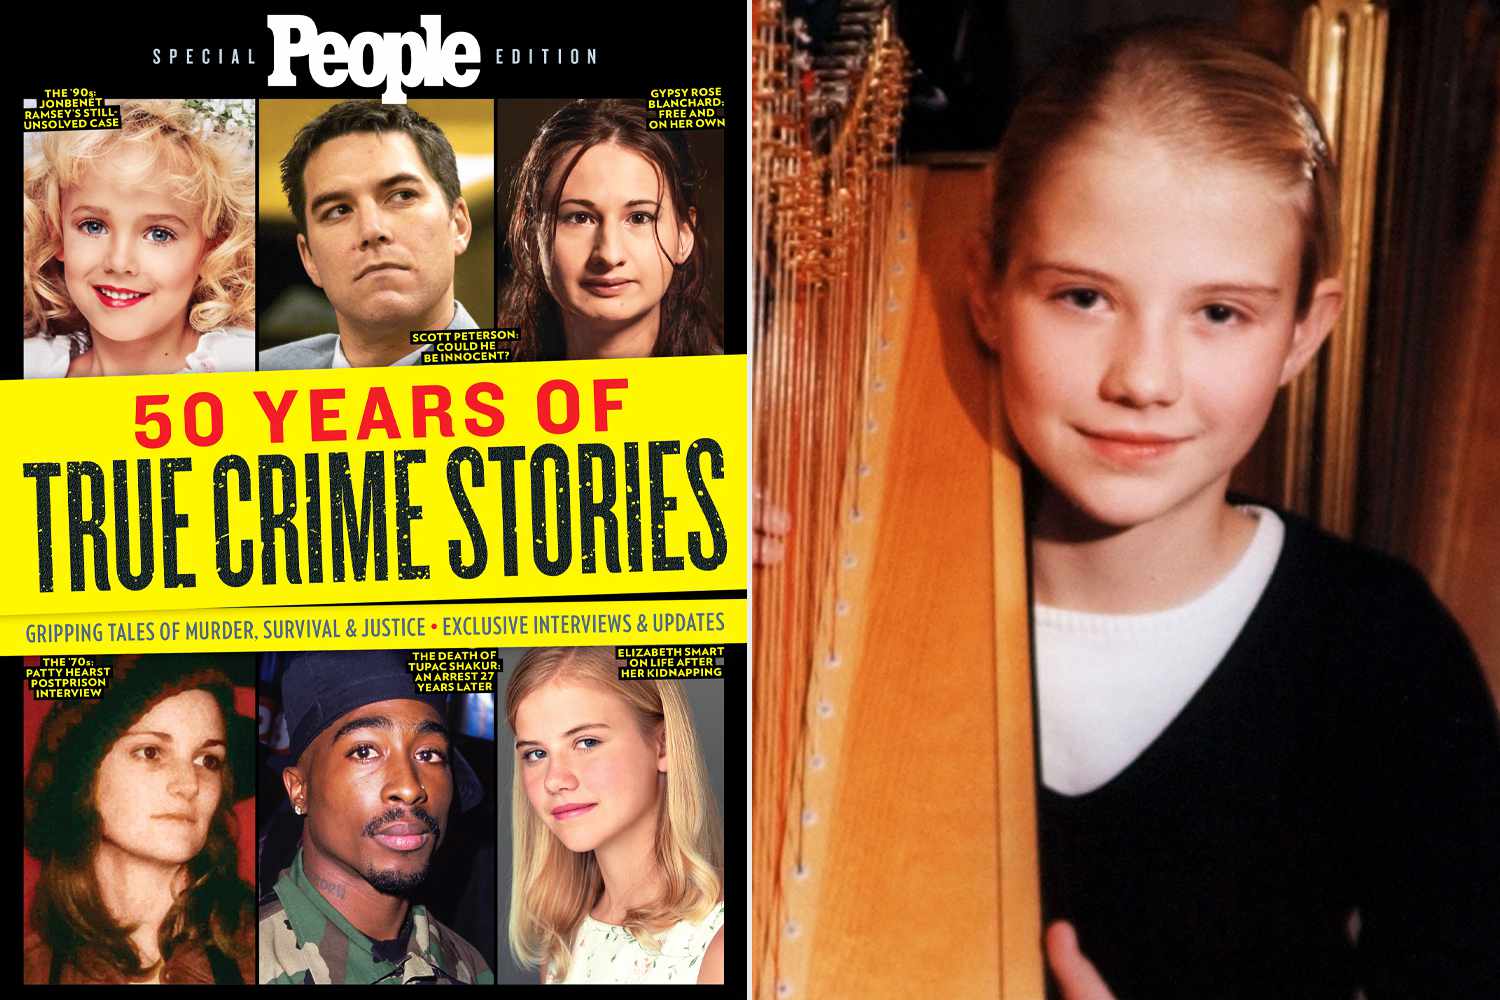 The Family of Kidnapped Teen Elizabeth Smart Speaks in a 2003 PEOPLE Cover Story: Read It Here